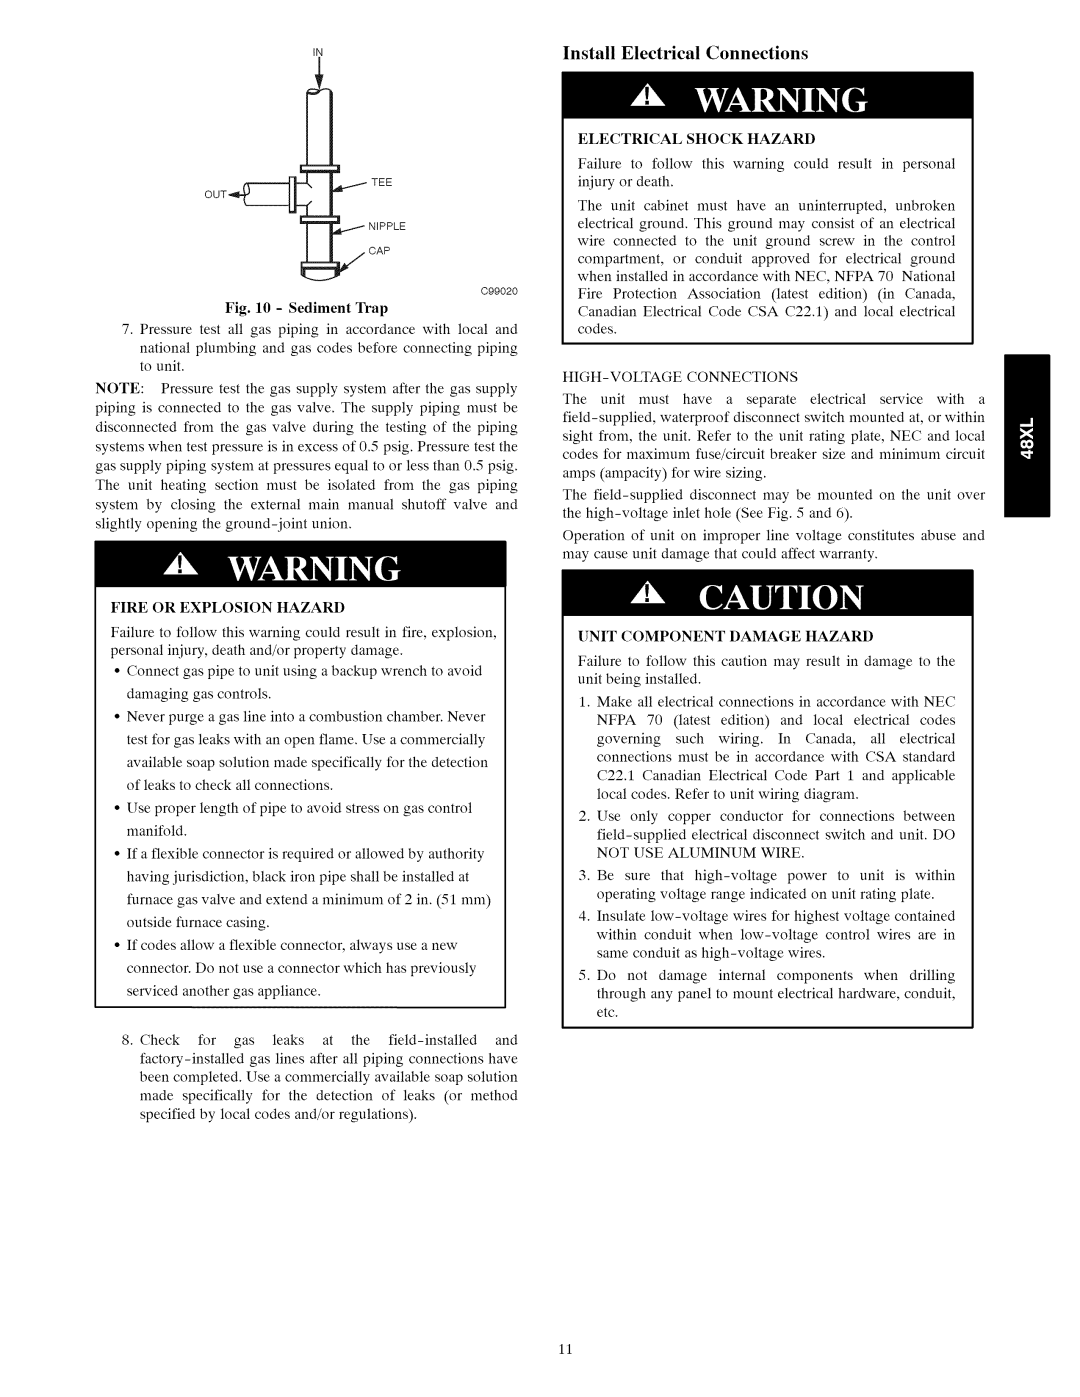 Carrier 48XL installation instructions Install Electrical Connections 